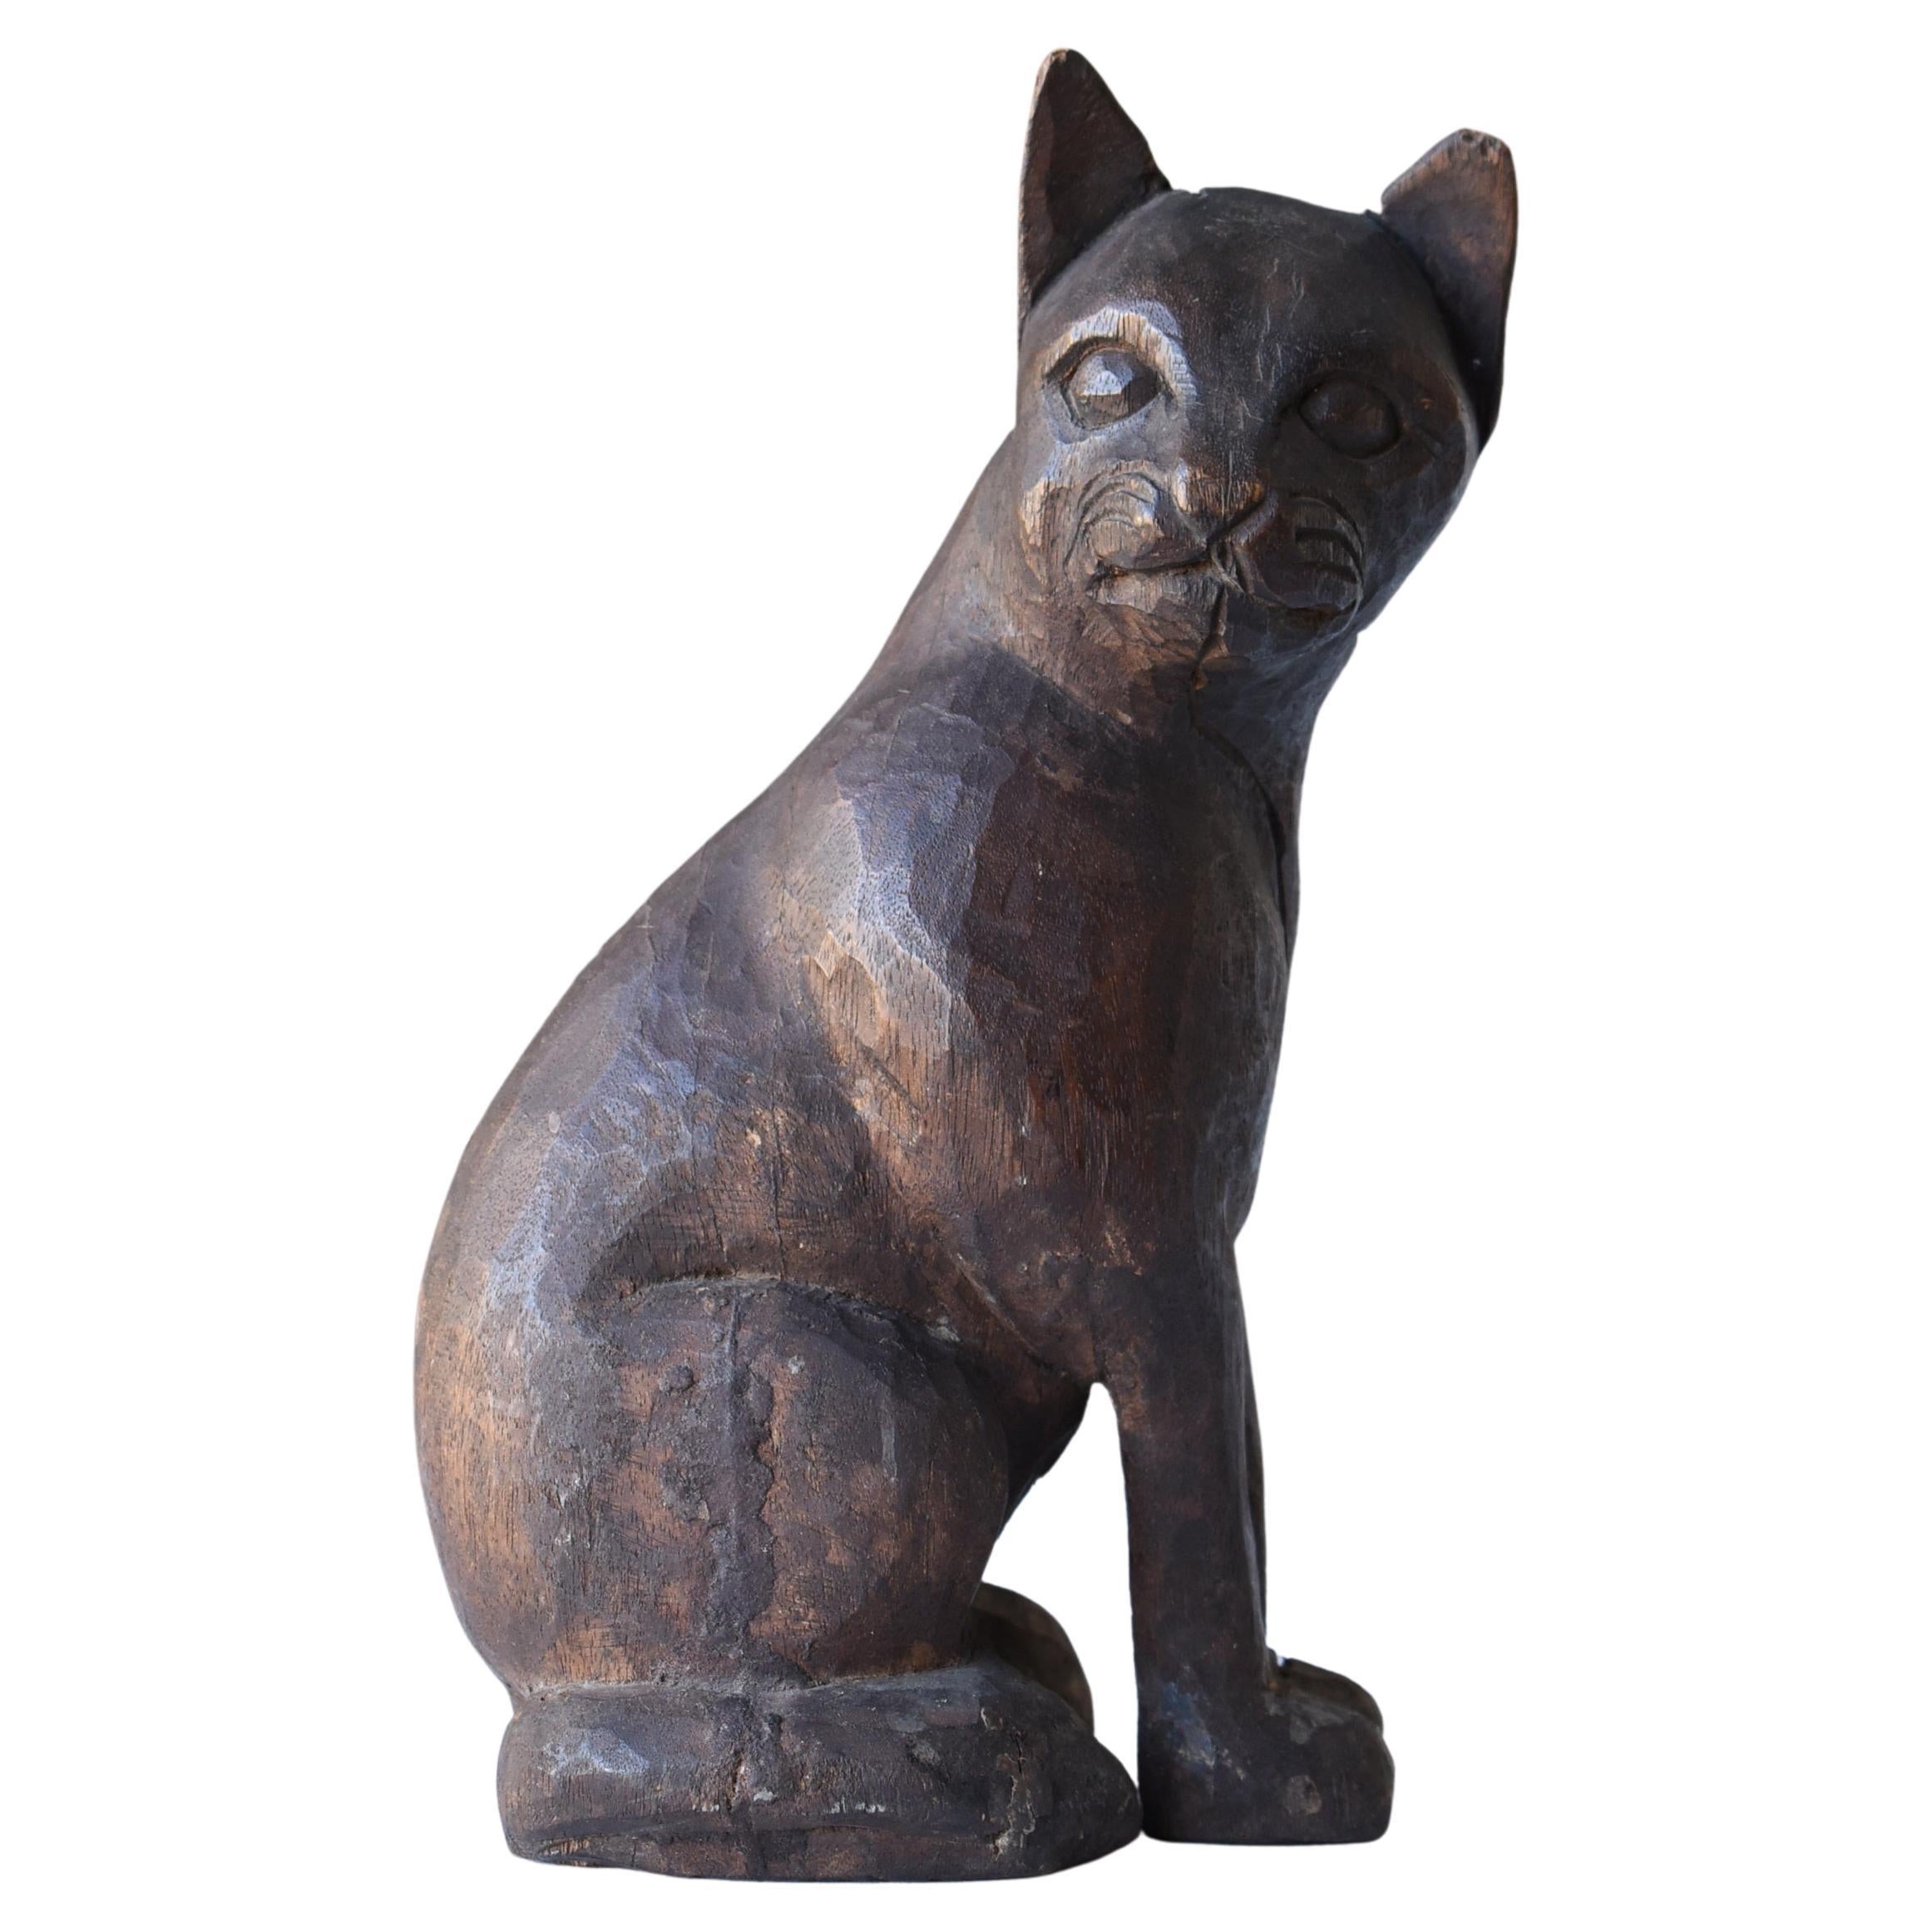 Japanese Antique Wood Carving Cat 1860s-1920s /Figurine Animal Sculpture Object